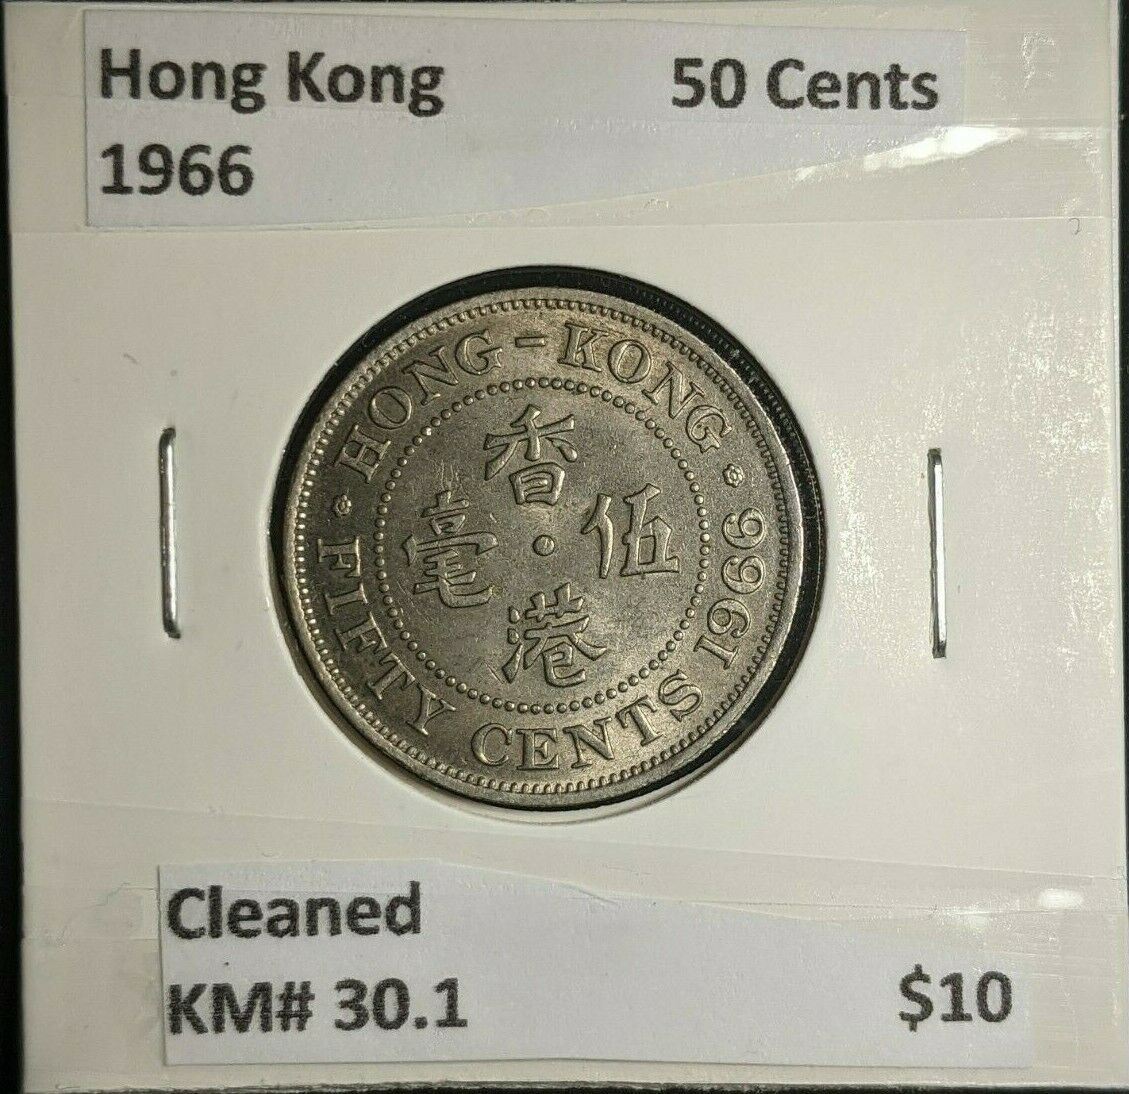 Hong Kong 1966 50 Cents 50c KM# 30.1 Cleaned   #703